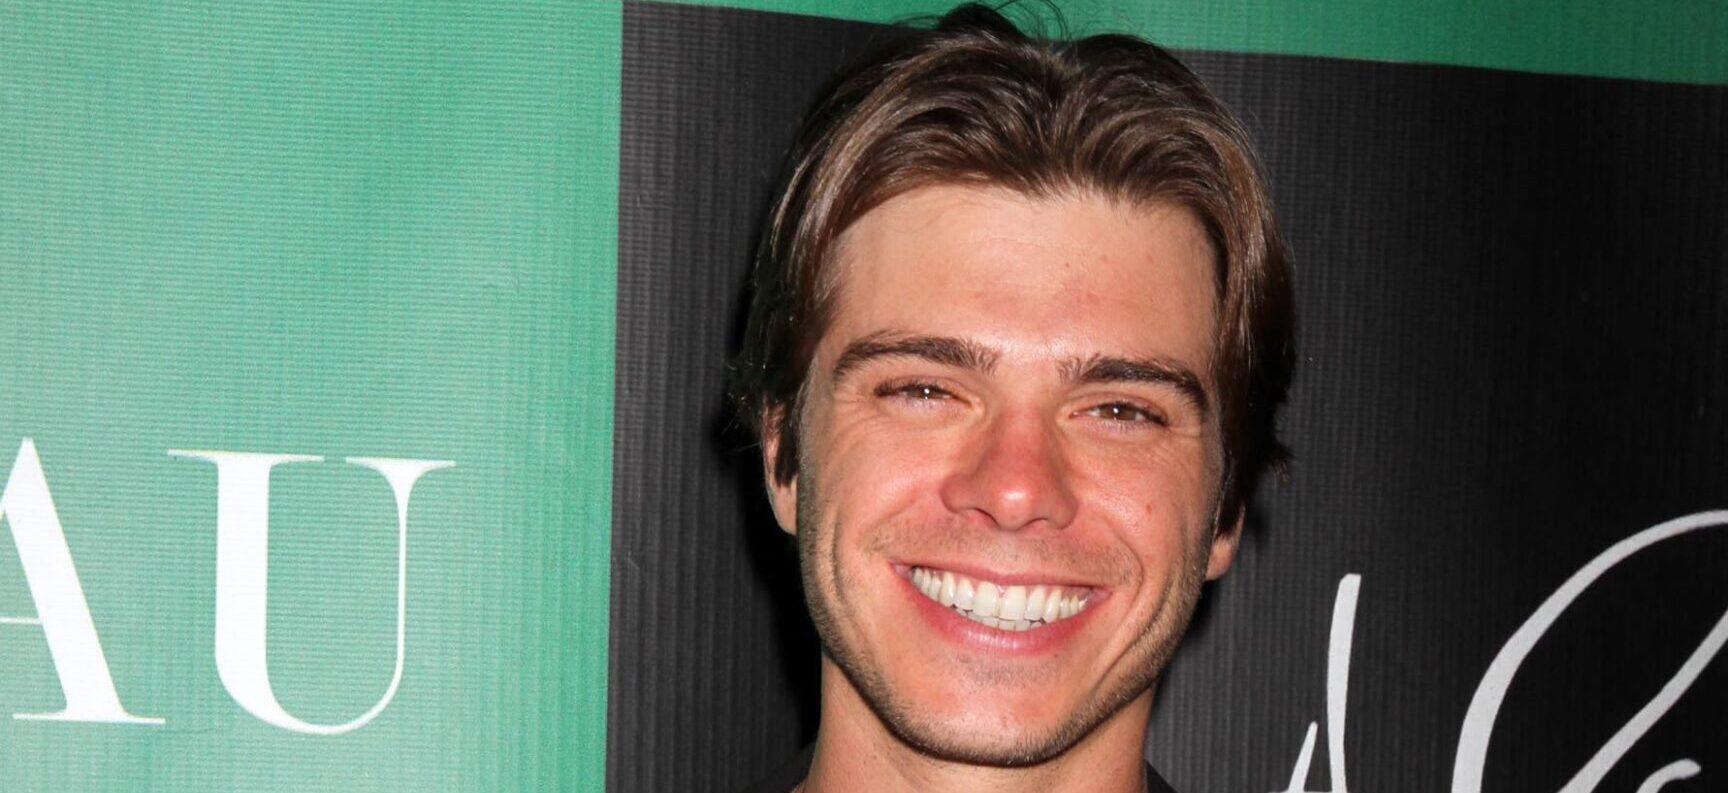 Matthew Lawrence Claims A ‘Prominent’ Director Asked Him To Strip In Exchange For A ‘Marvel’ Role